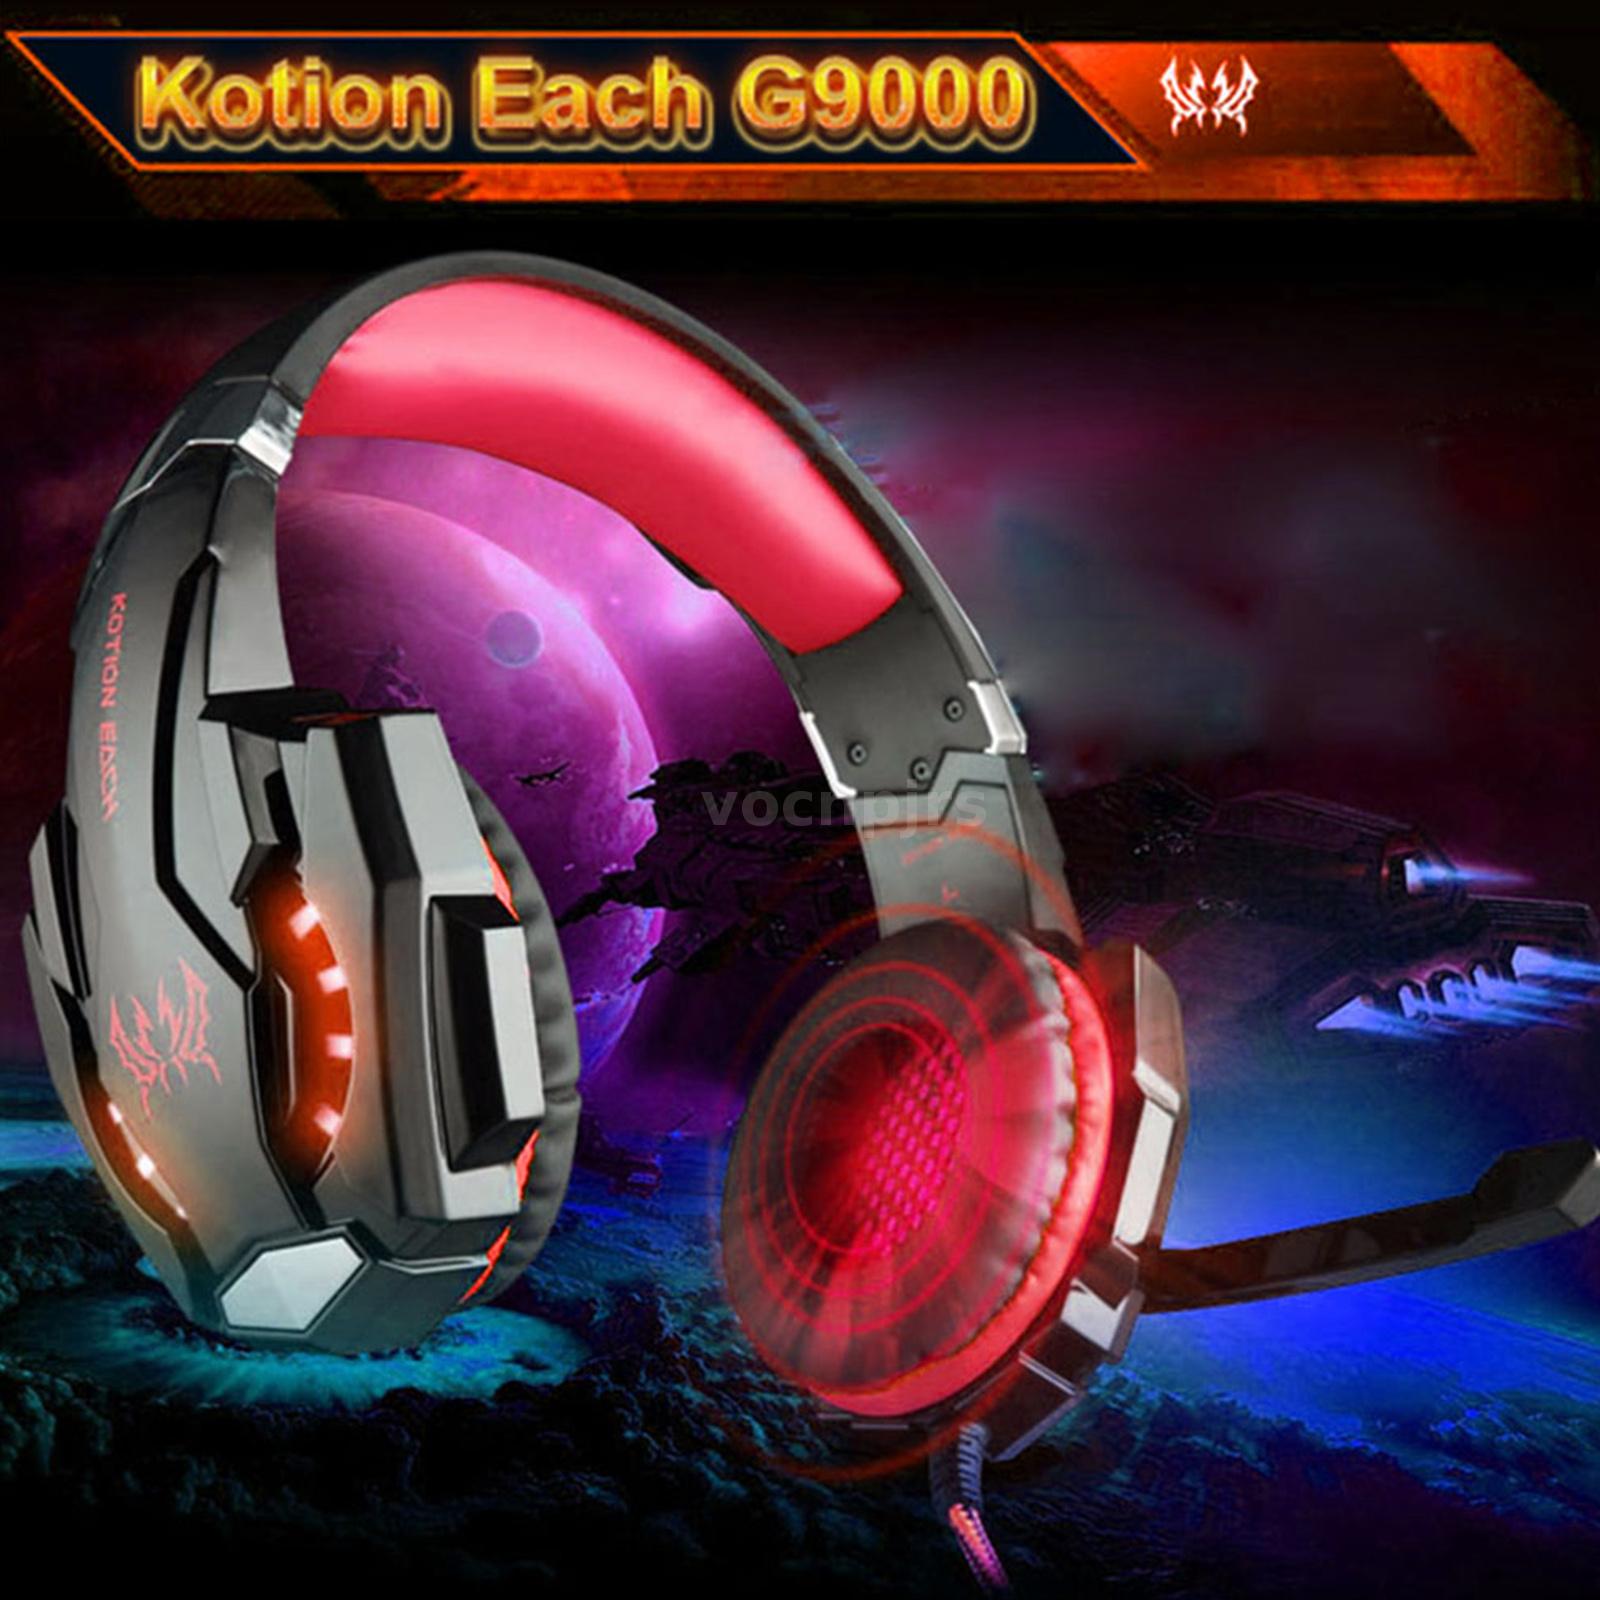 kotion each g9000 usb cable